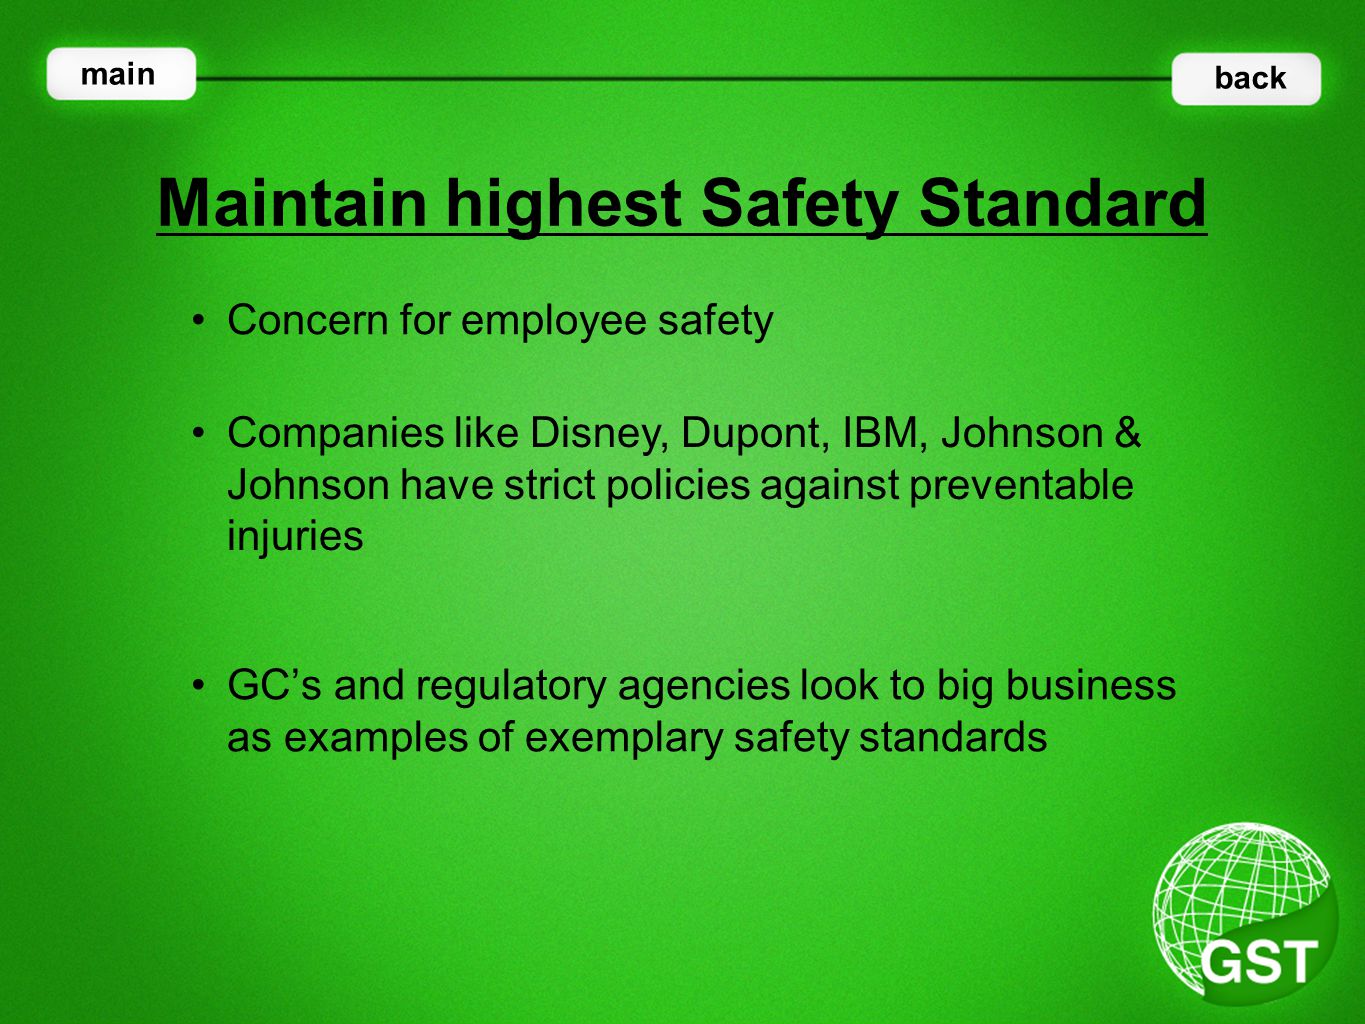 Concern for employee safety Maintain highest Safety Standard main back Companies like Disney, Dupont, IBM, Johnson & Johnson have strict policies against preventable injuries GC’s and regulatory agencies look to big business as examples of exemplary safety standards